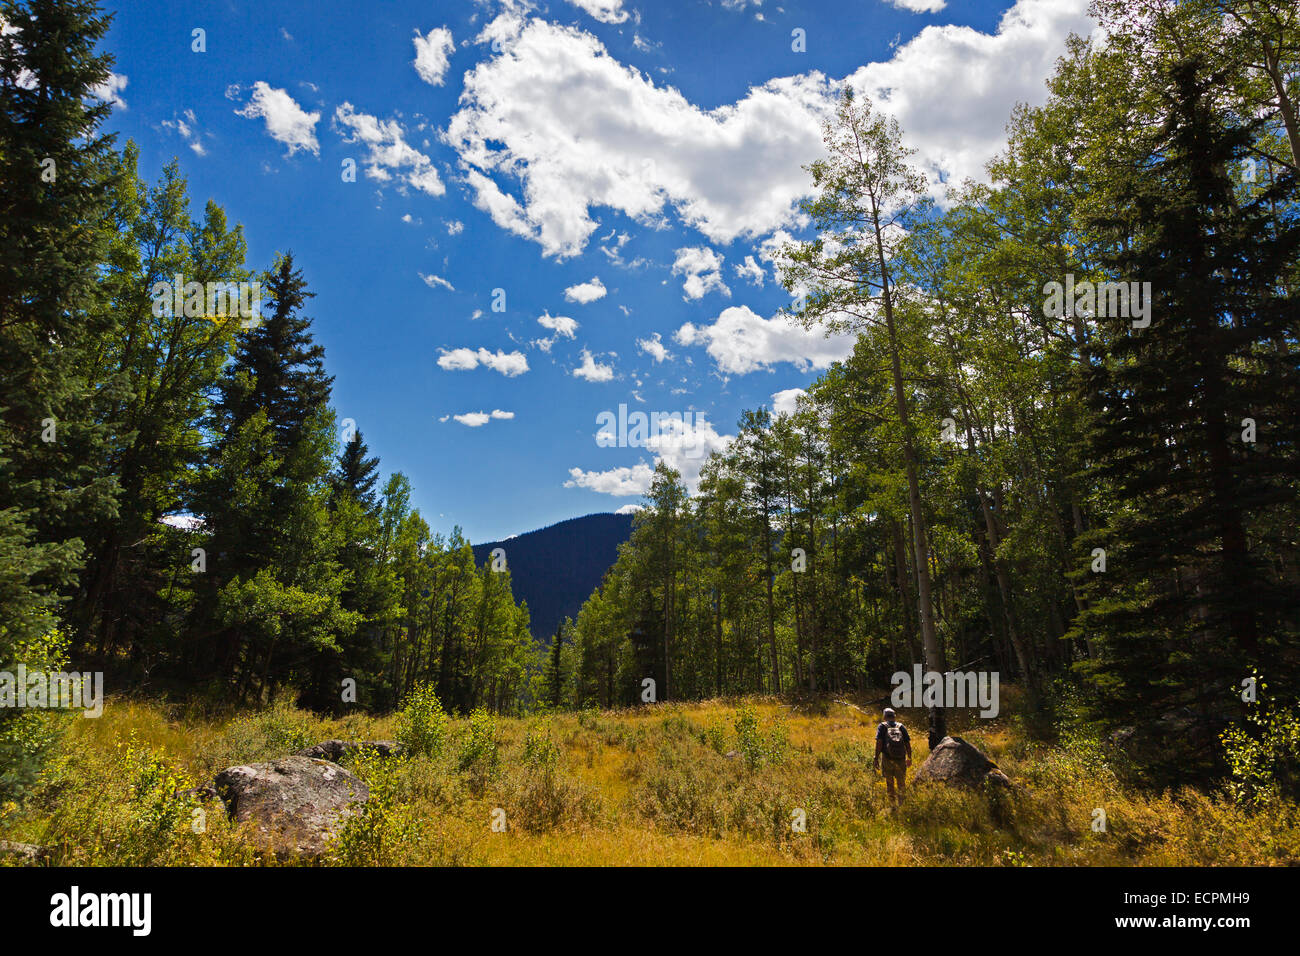 SPRUCE TREES and mountain scenic - SOUTHERN COLORADO Stock Photo